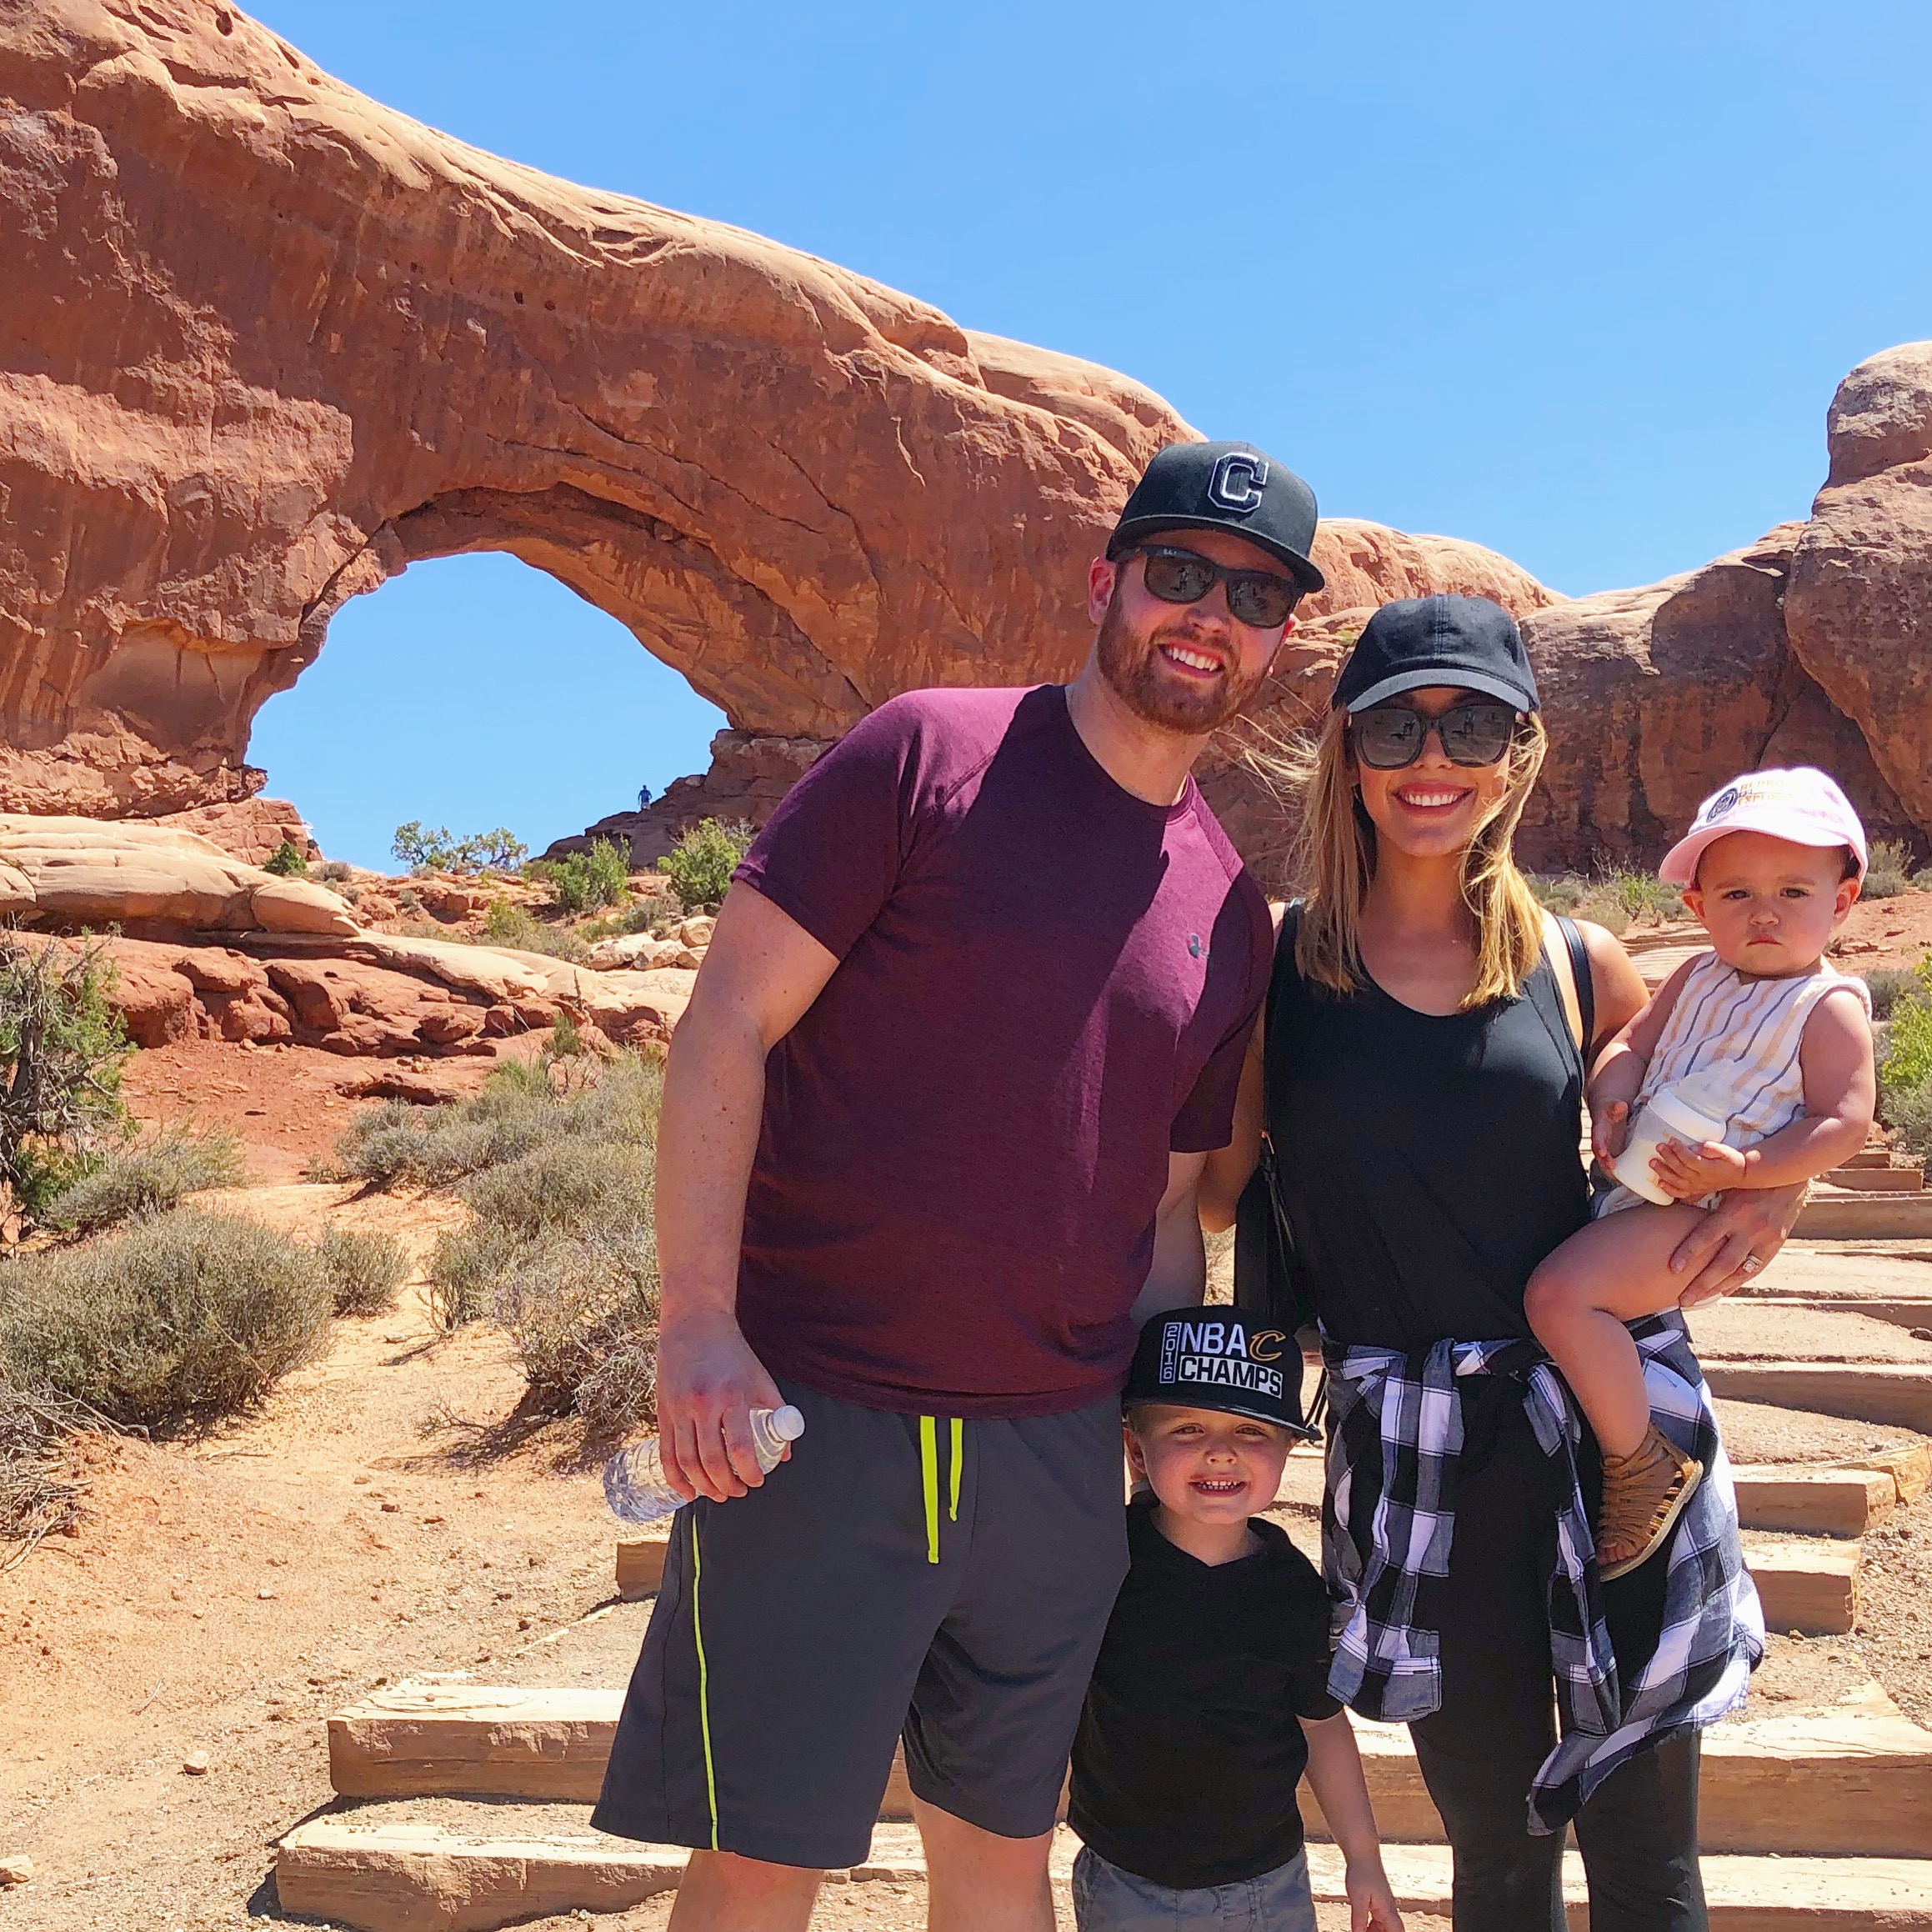 Brianna K traveling with her young family to the Arches National Park in Utah.